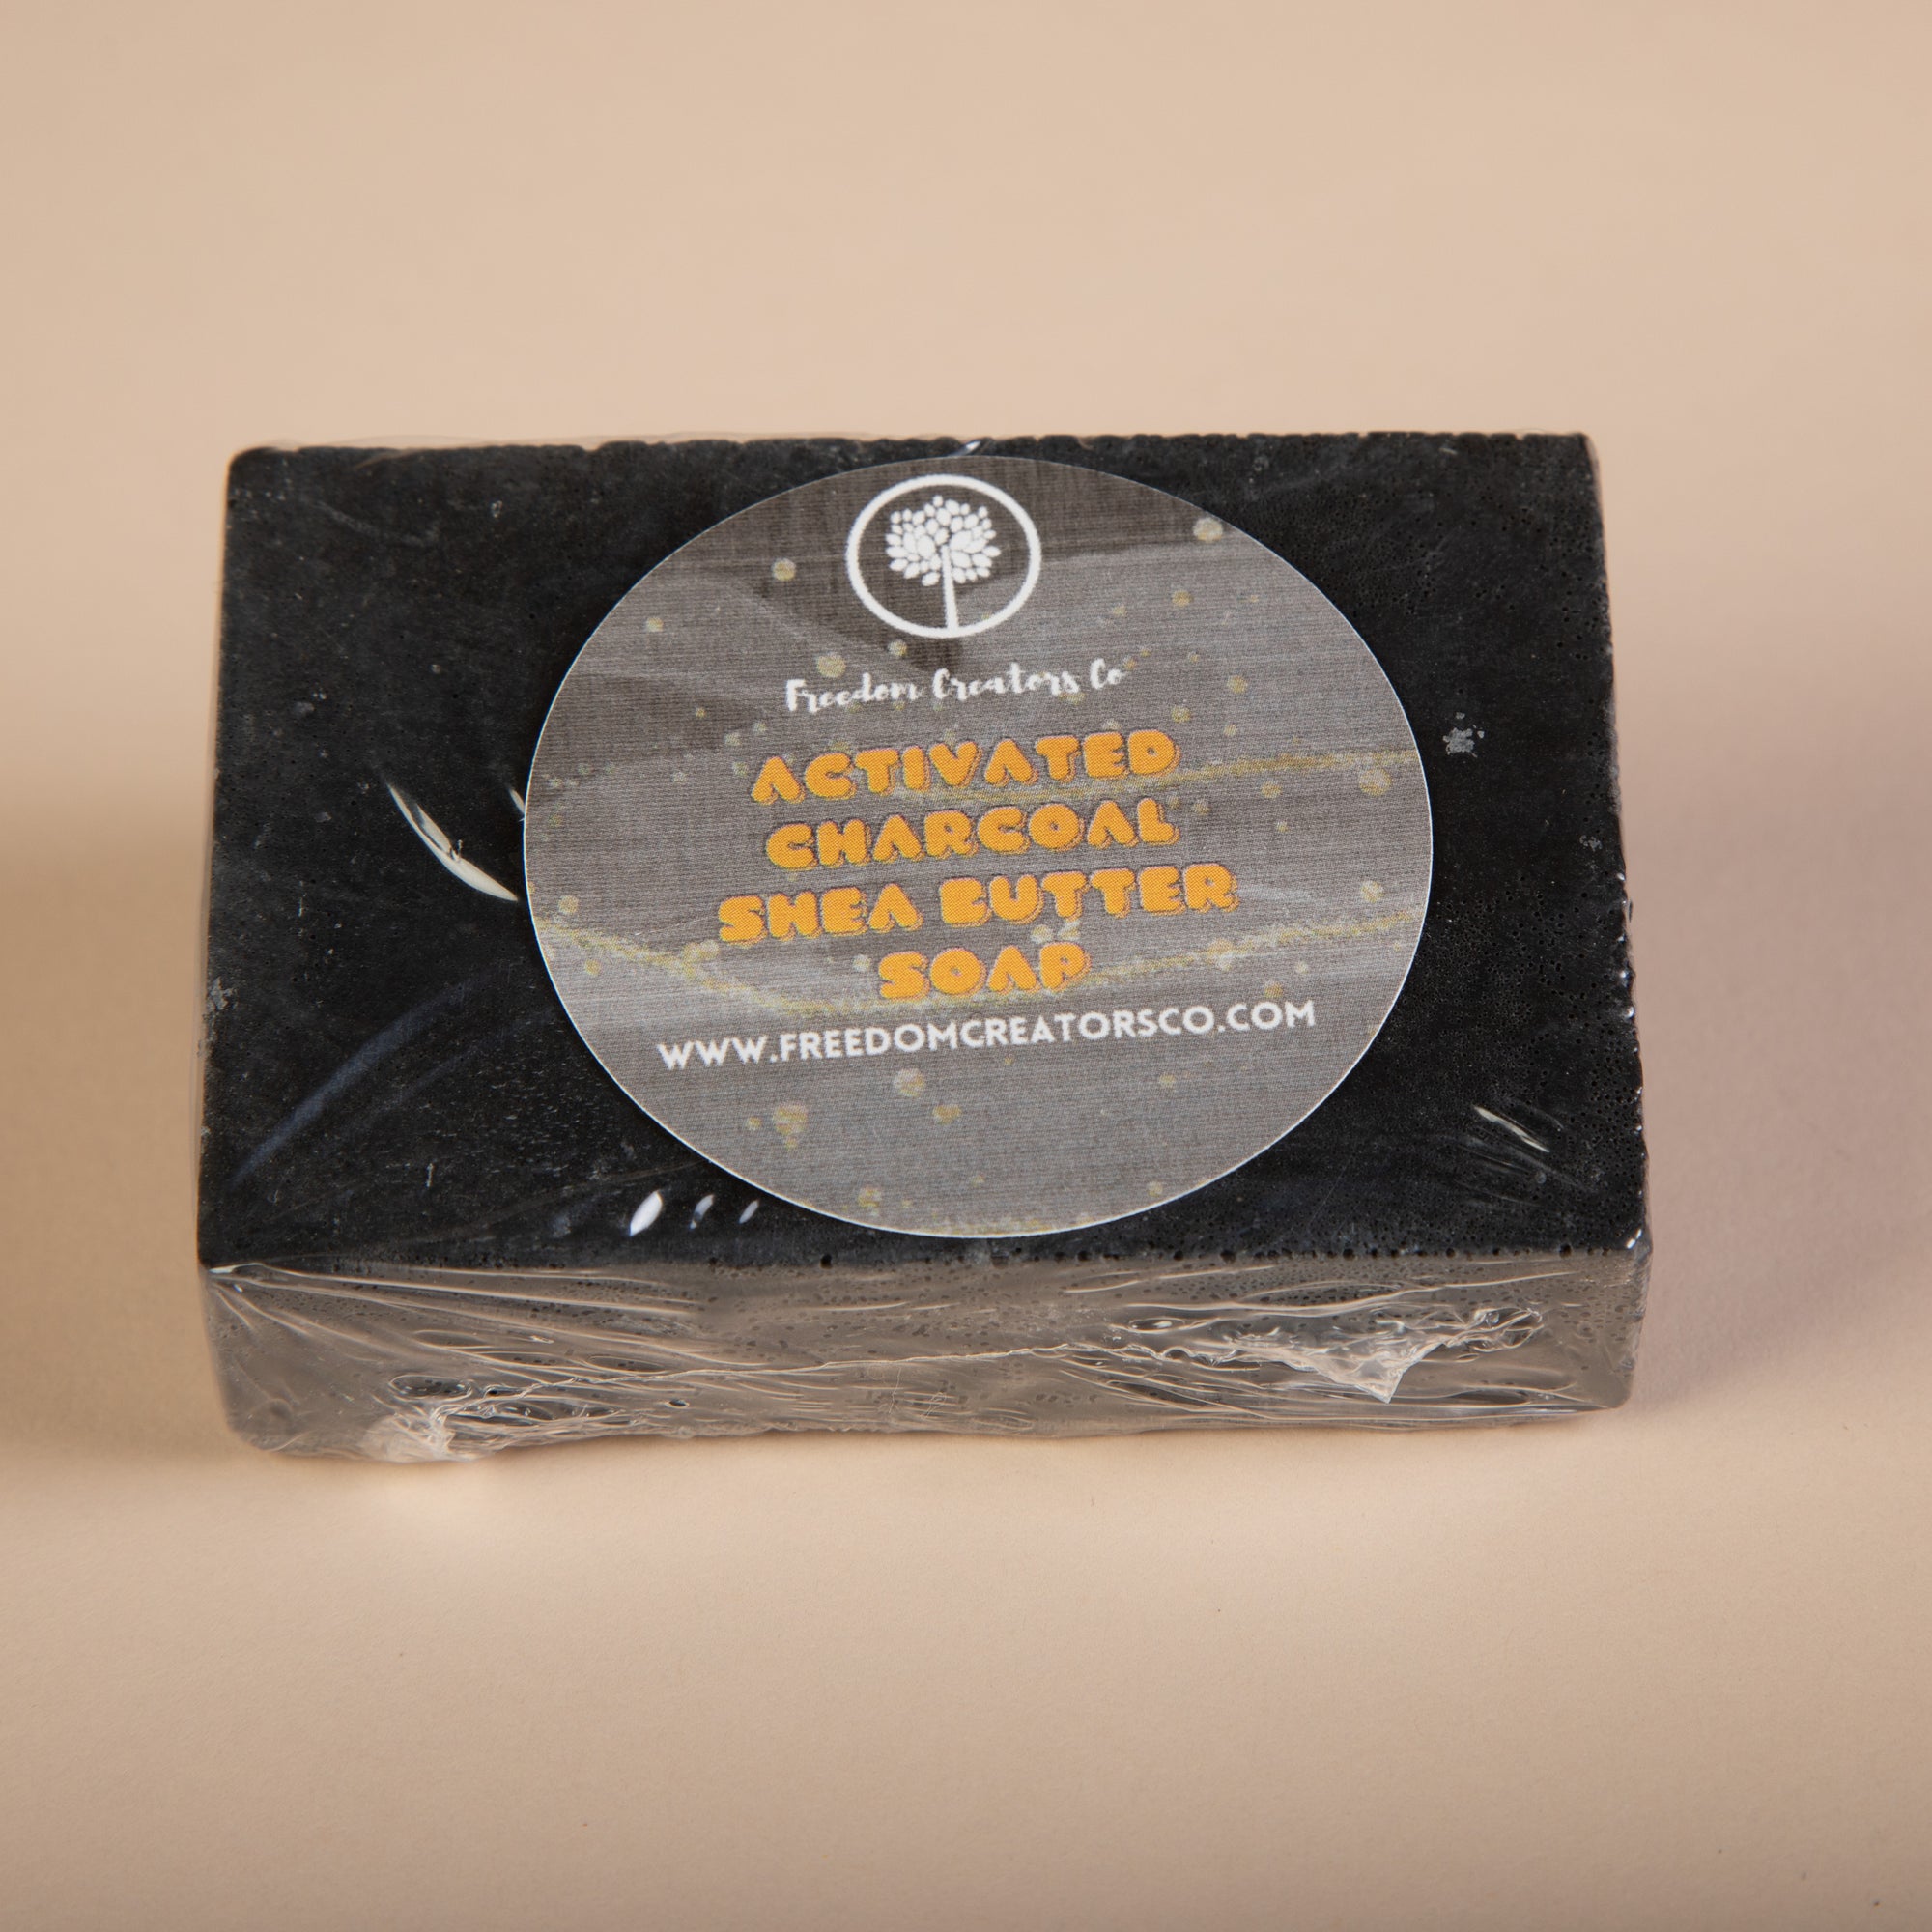 Activated Charcoal Shea Butter Soap